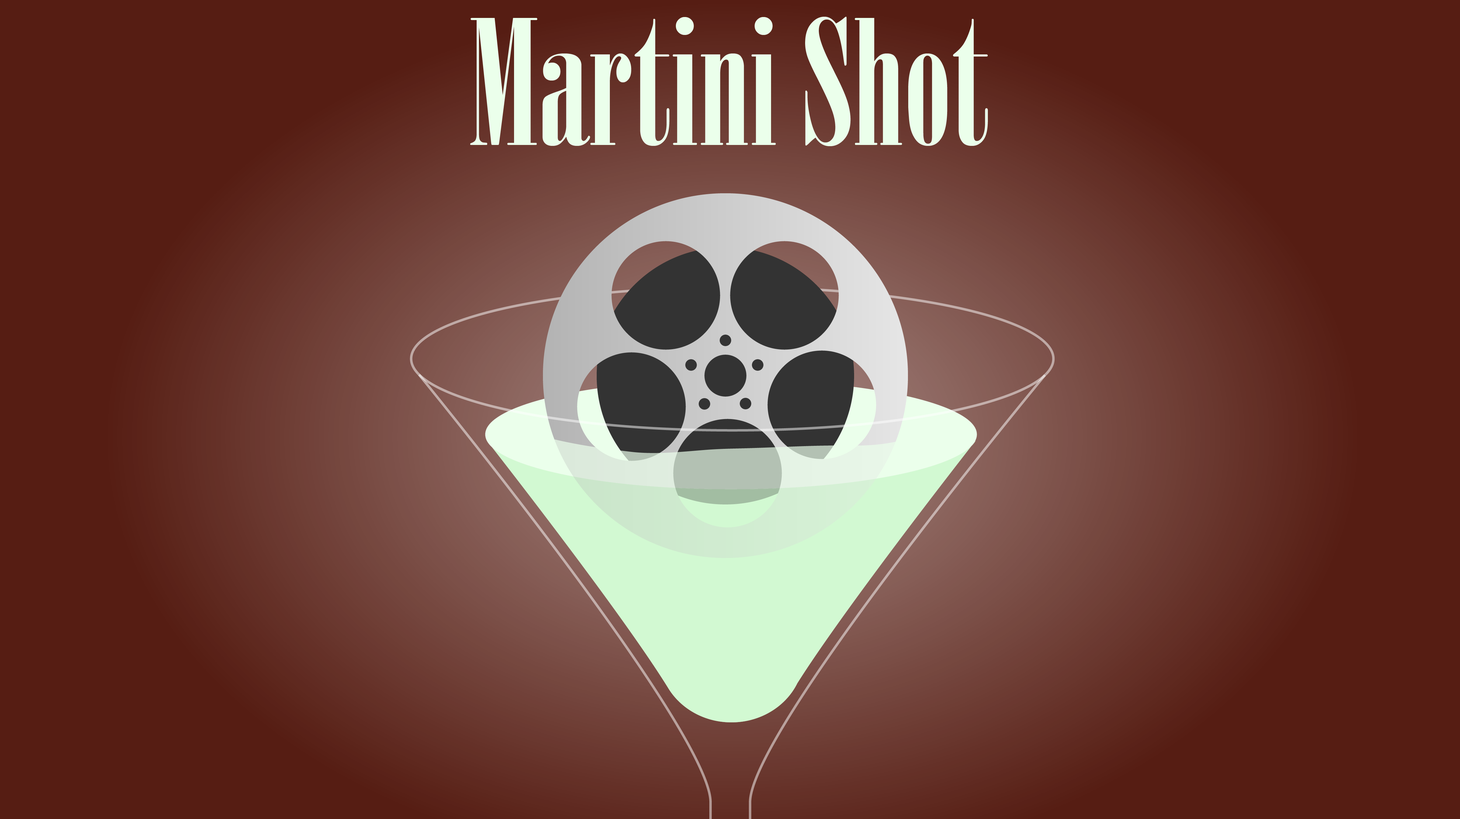 This is Rob Long and on today’s Martini Shot I talk about how you know when someone really loves you, by marshmallows and piles of shrimp.